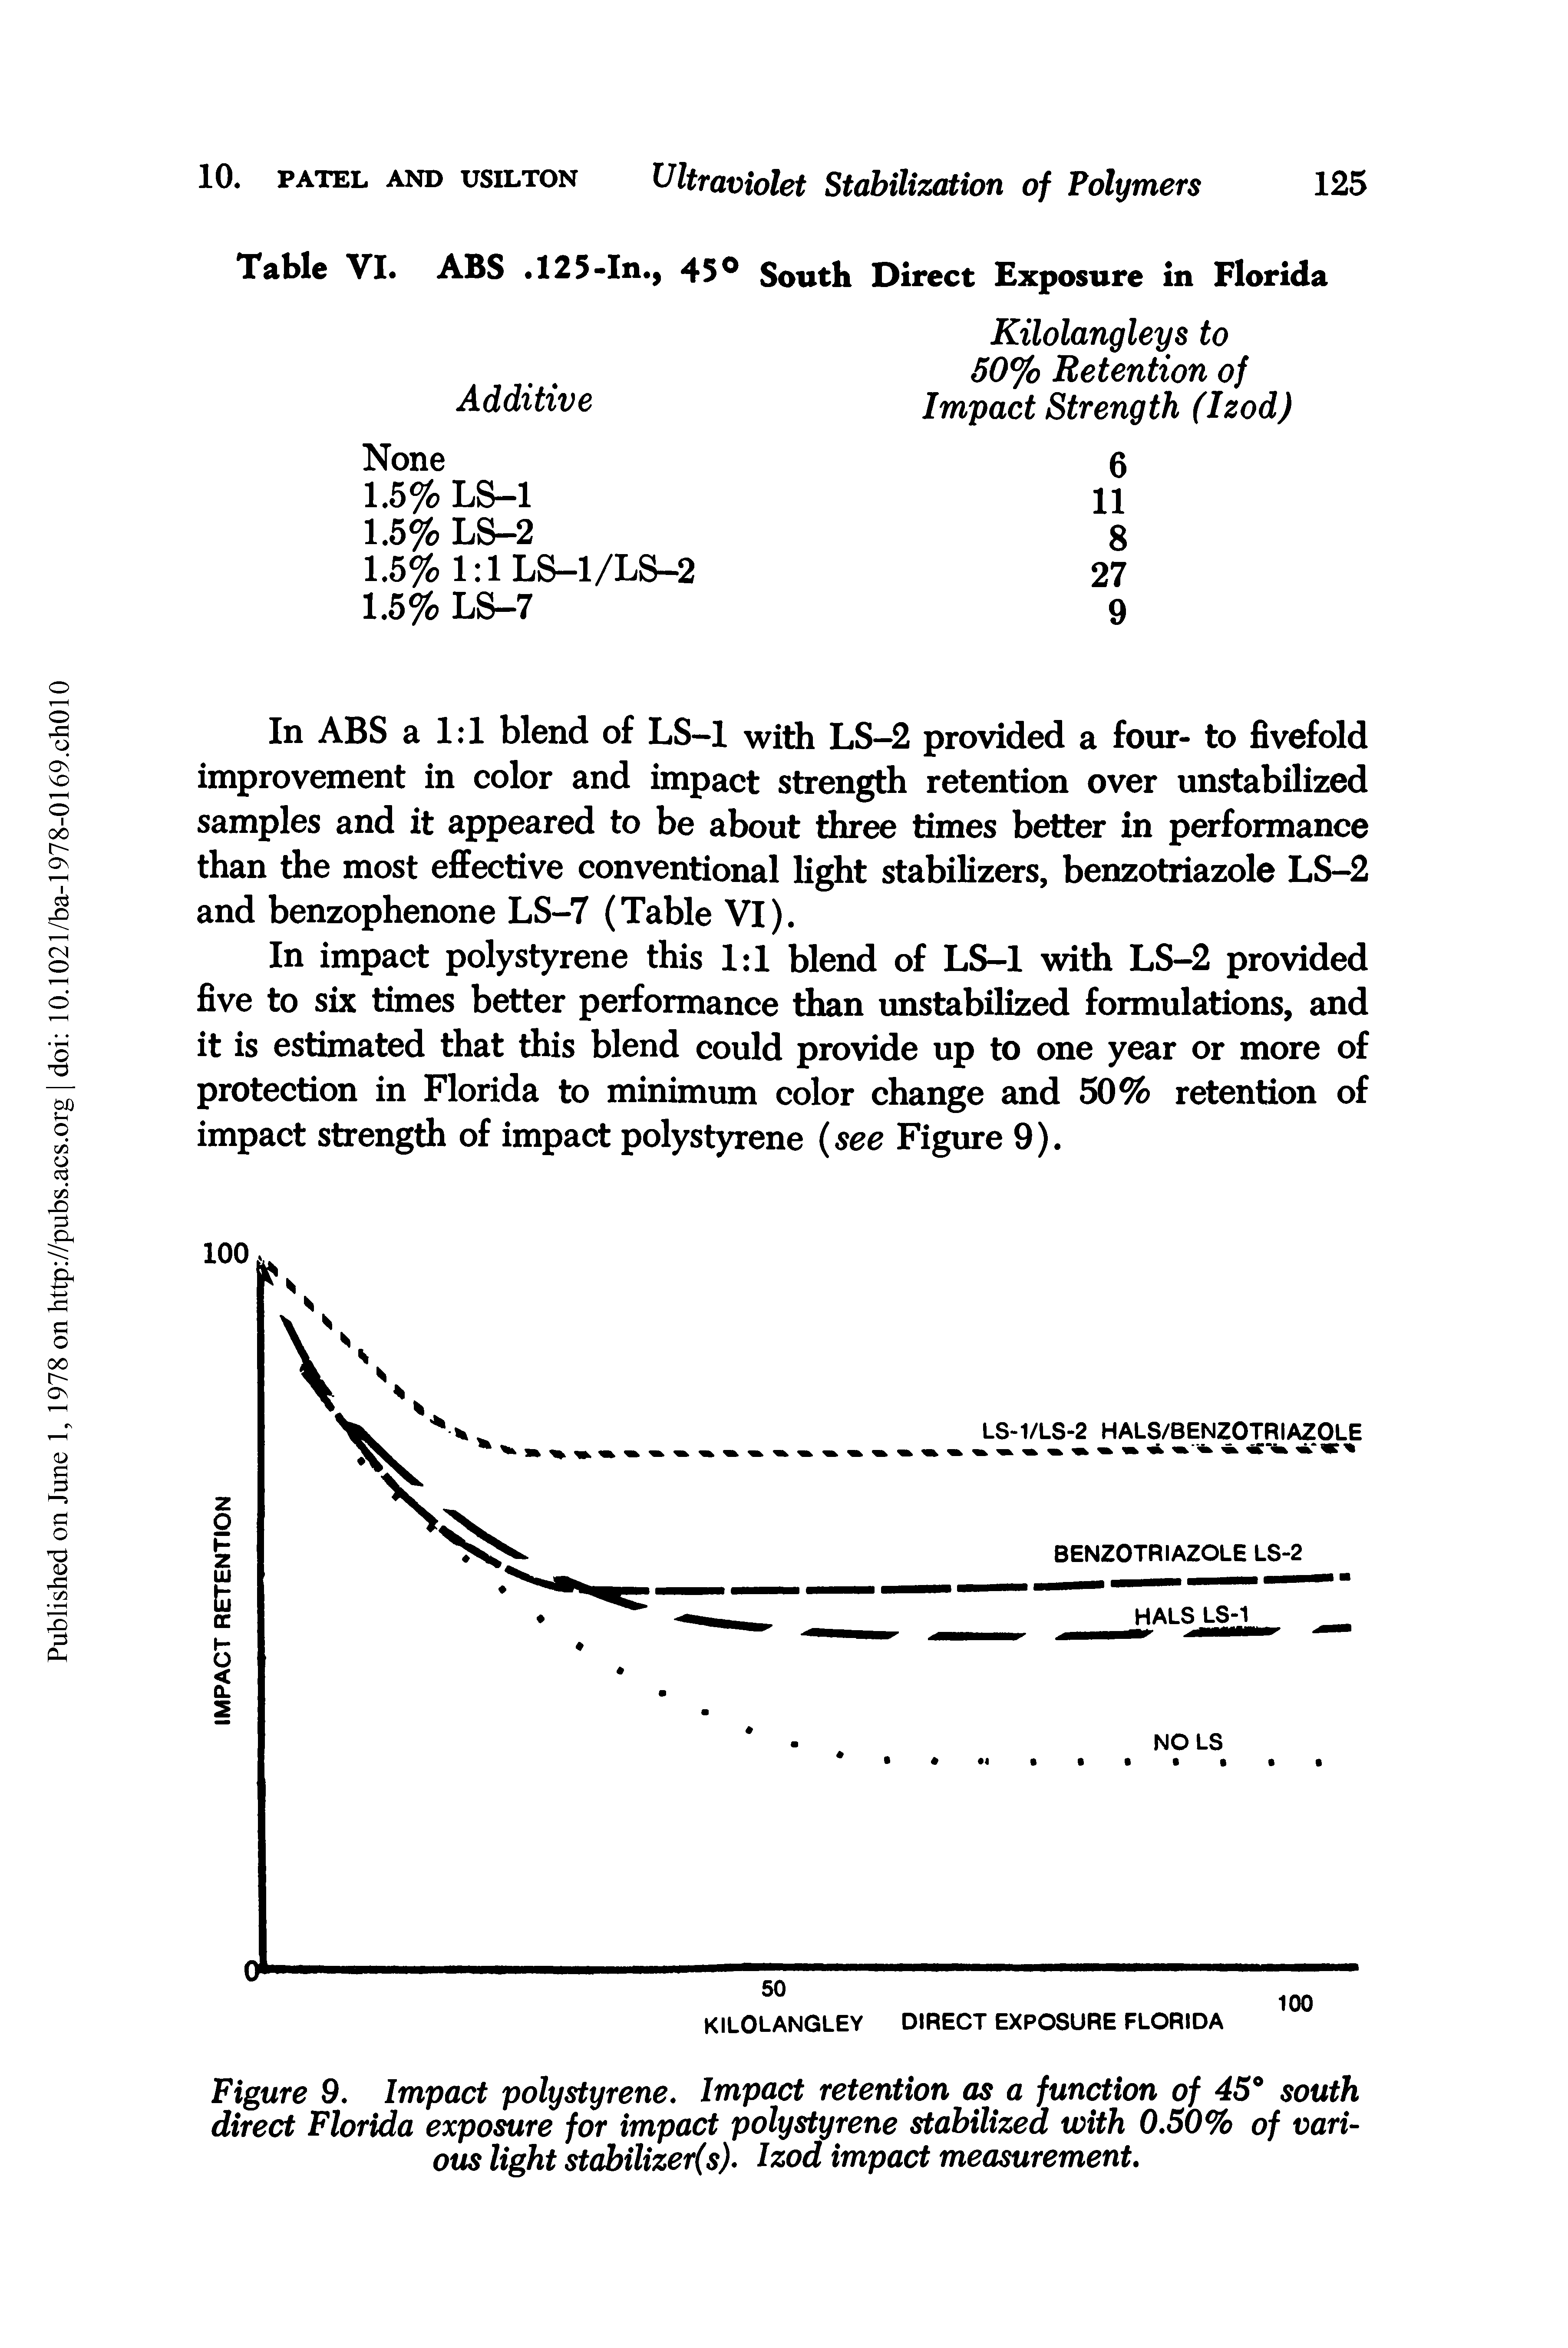 Figure 9. Impact polystyrene. Impact retention as a function of 45° south direct Florida exposure for impact polystyrene stabilized with 0.50% of various light stabilizers) Izod impact measurement.